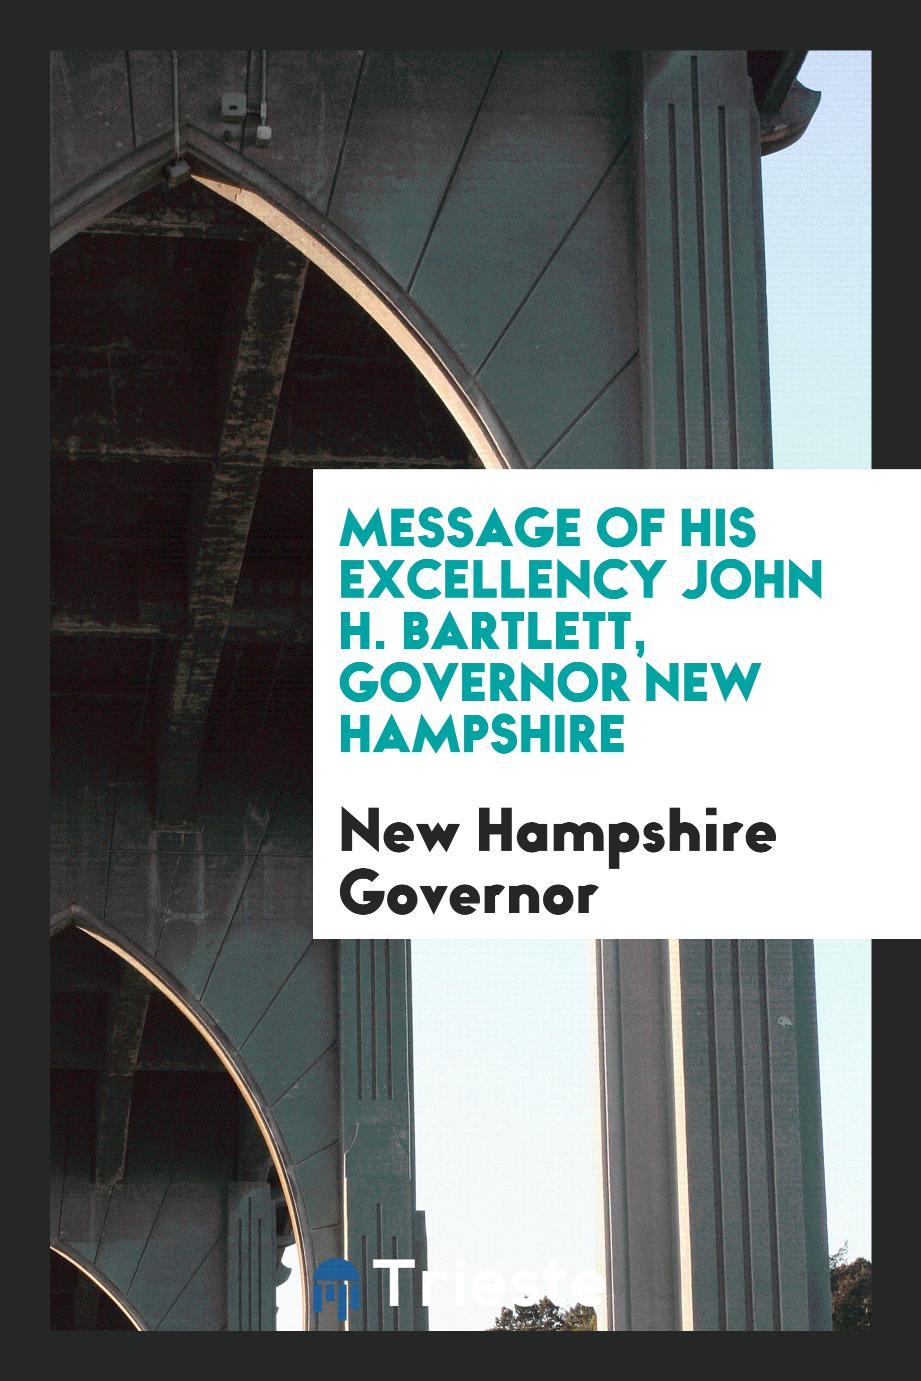 Message of his excellency John H. Bartlett, Governor New Hampshire